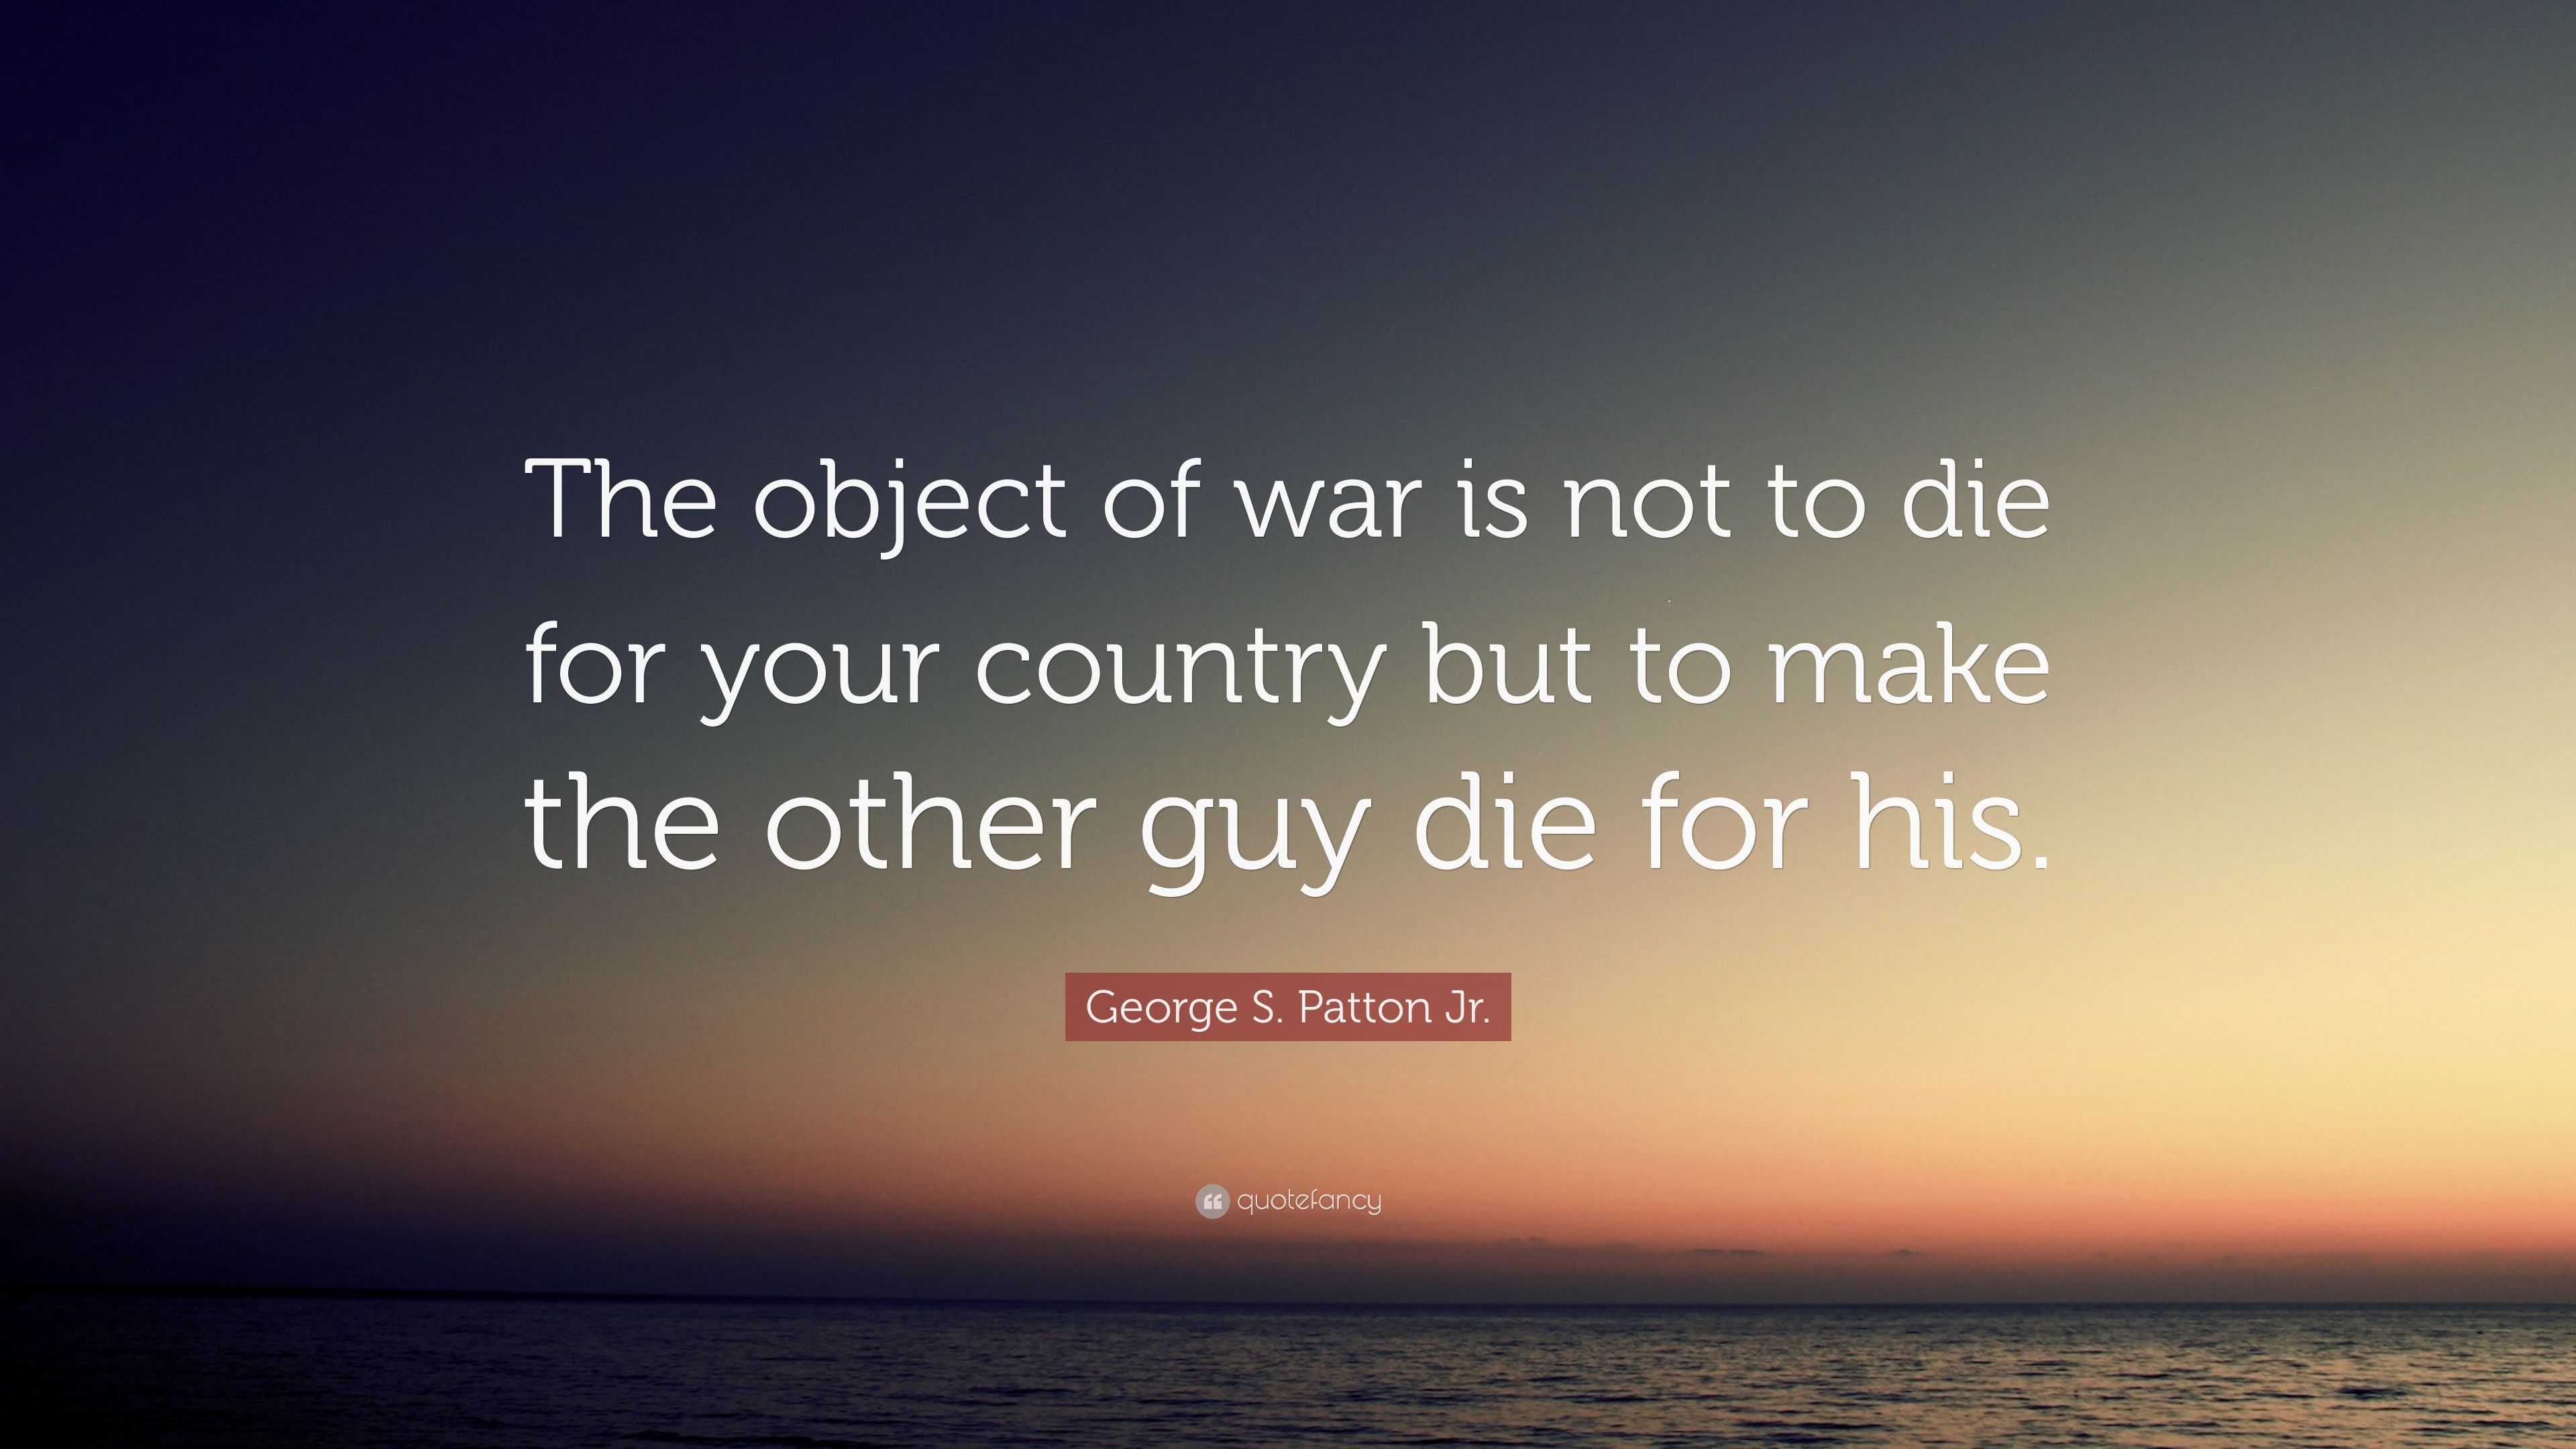 George S. Patton Jr. Quote: “The object of war is not to die for your ...